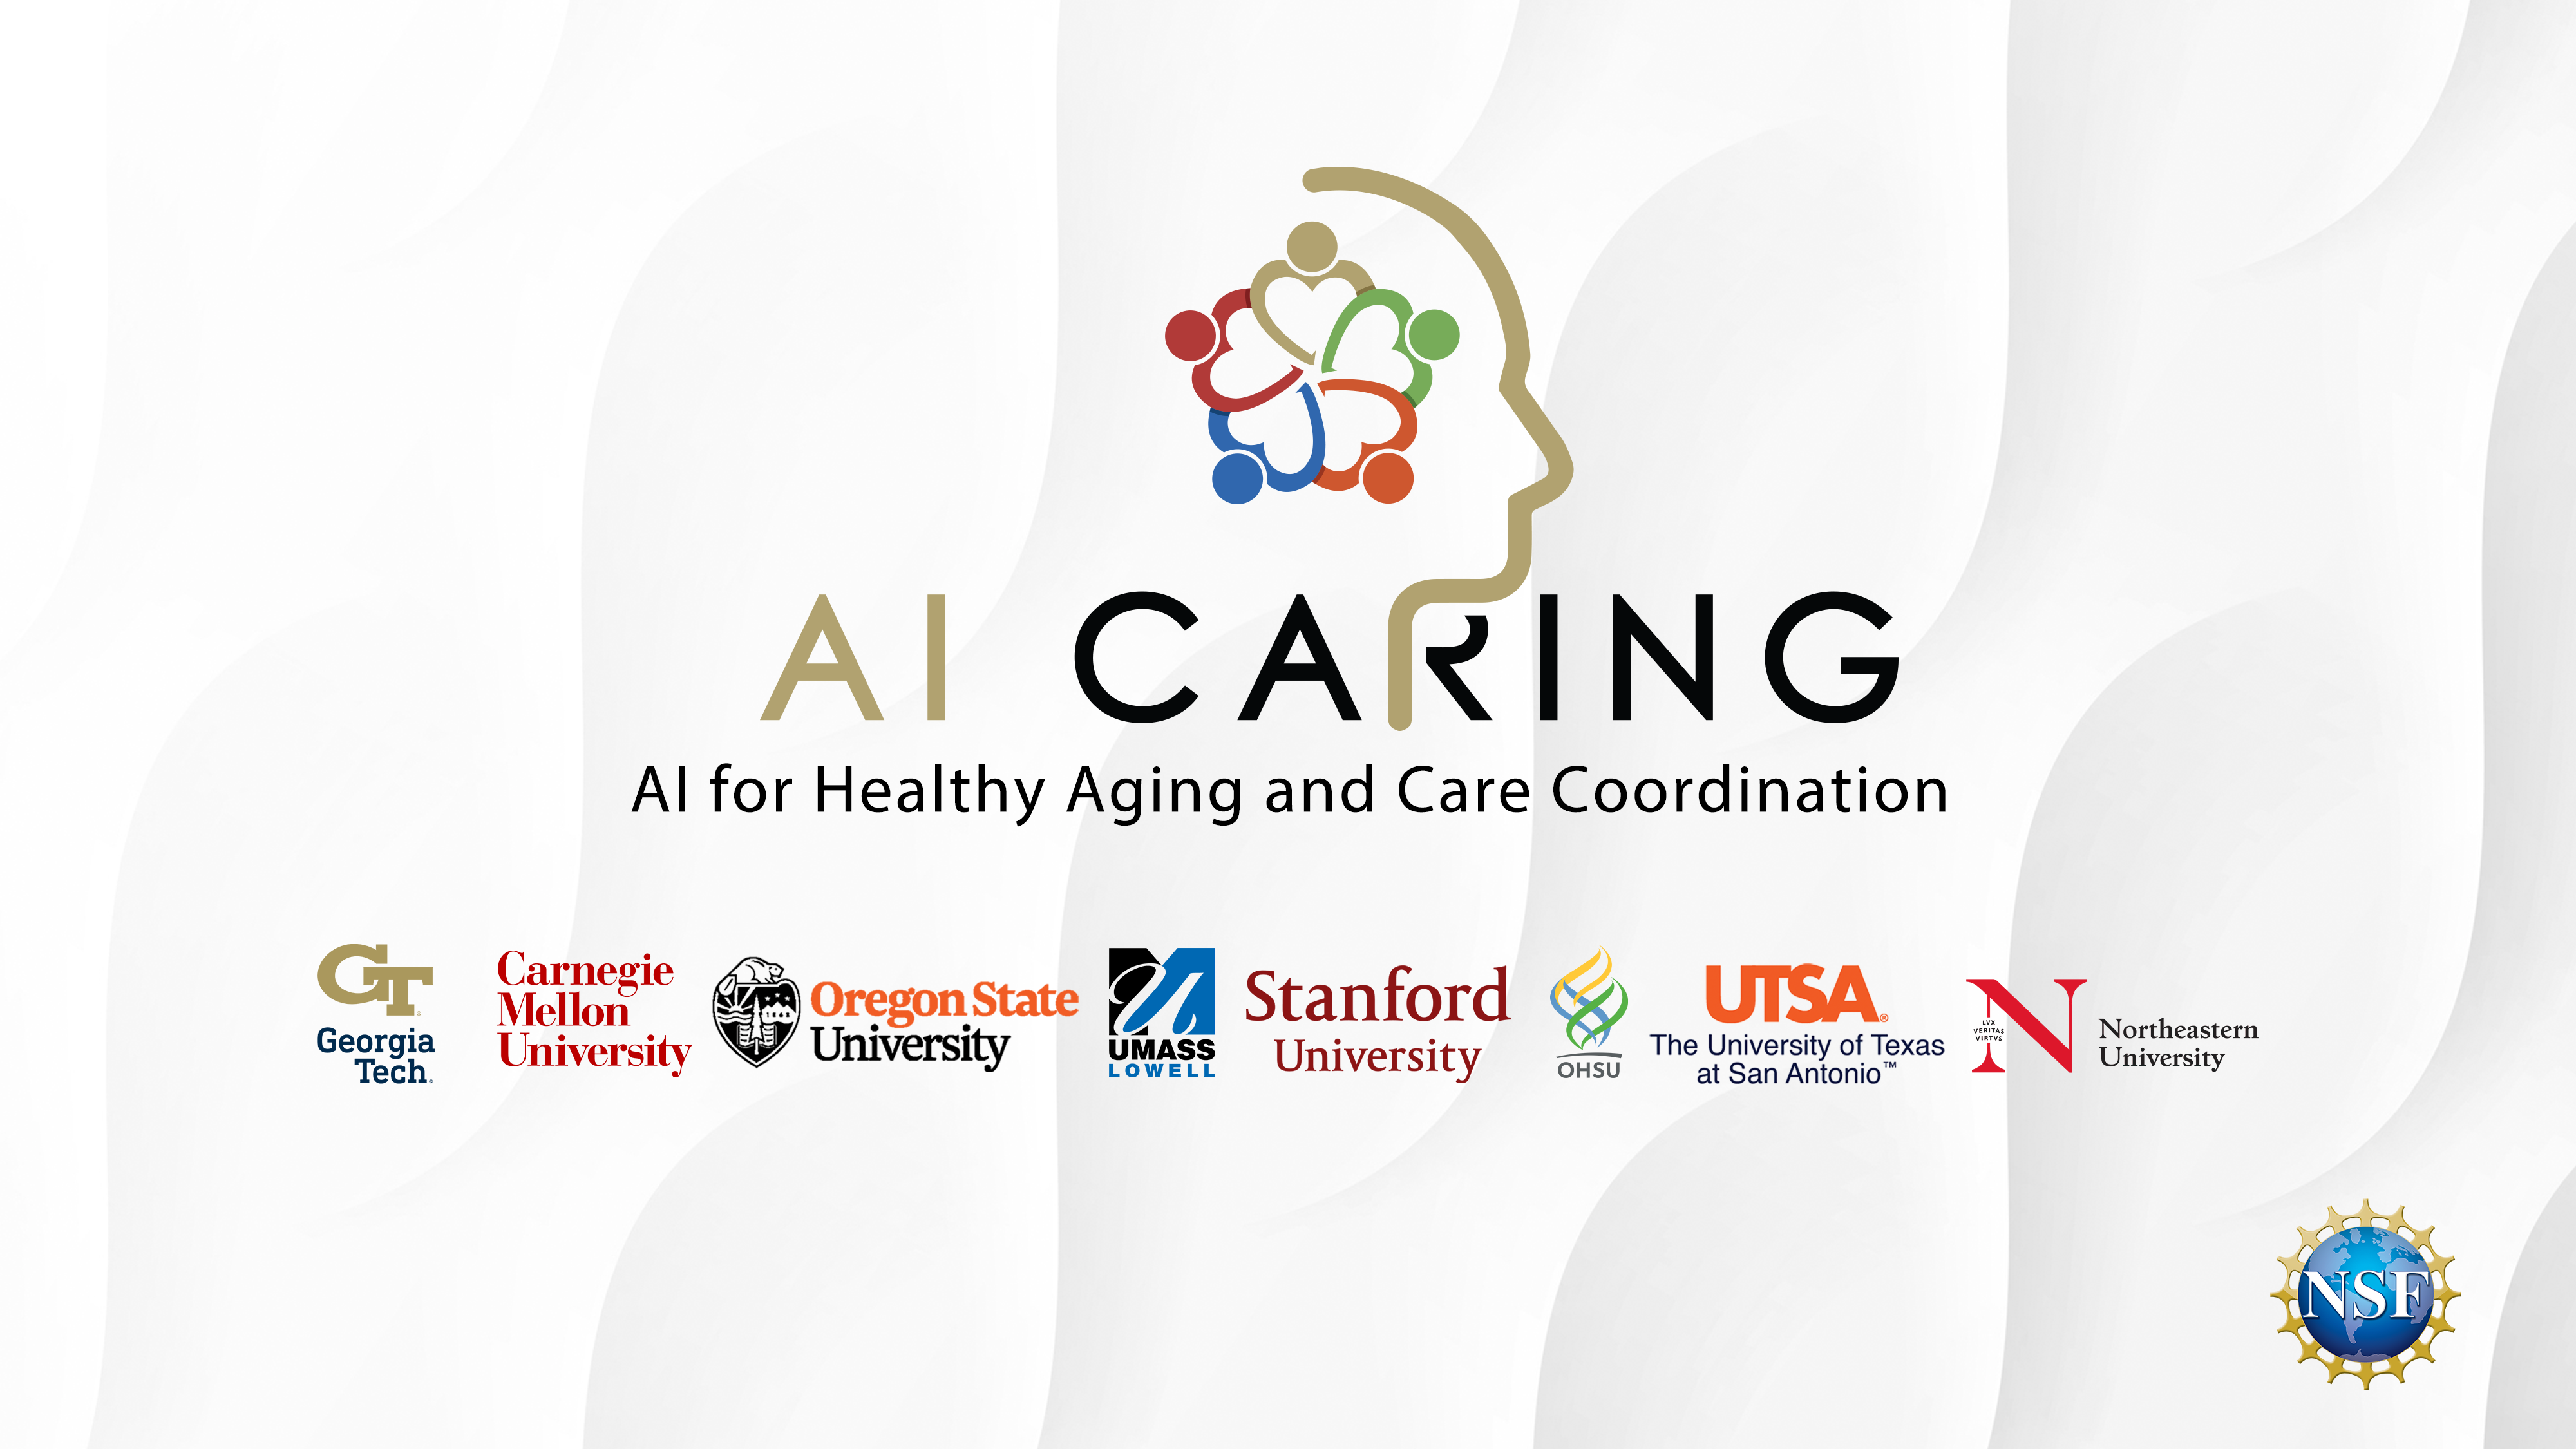 AI-CARING Newsletter